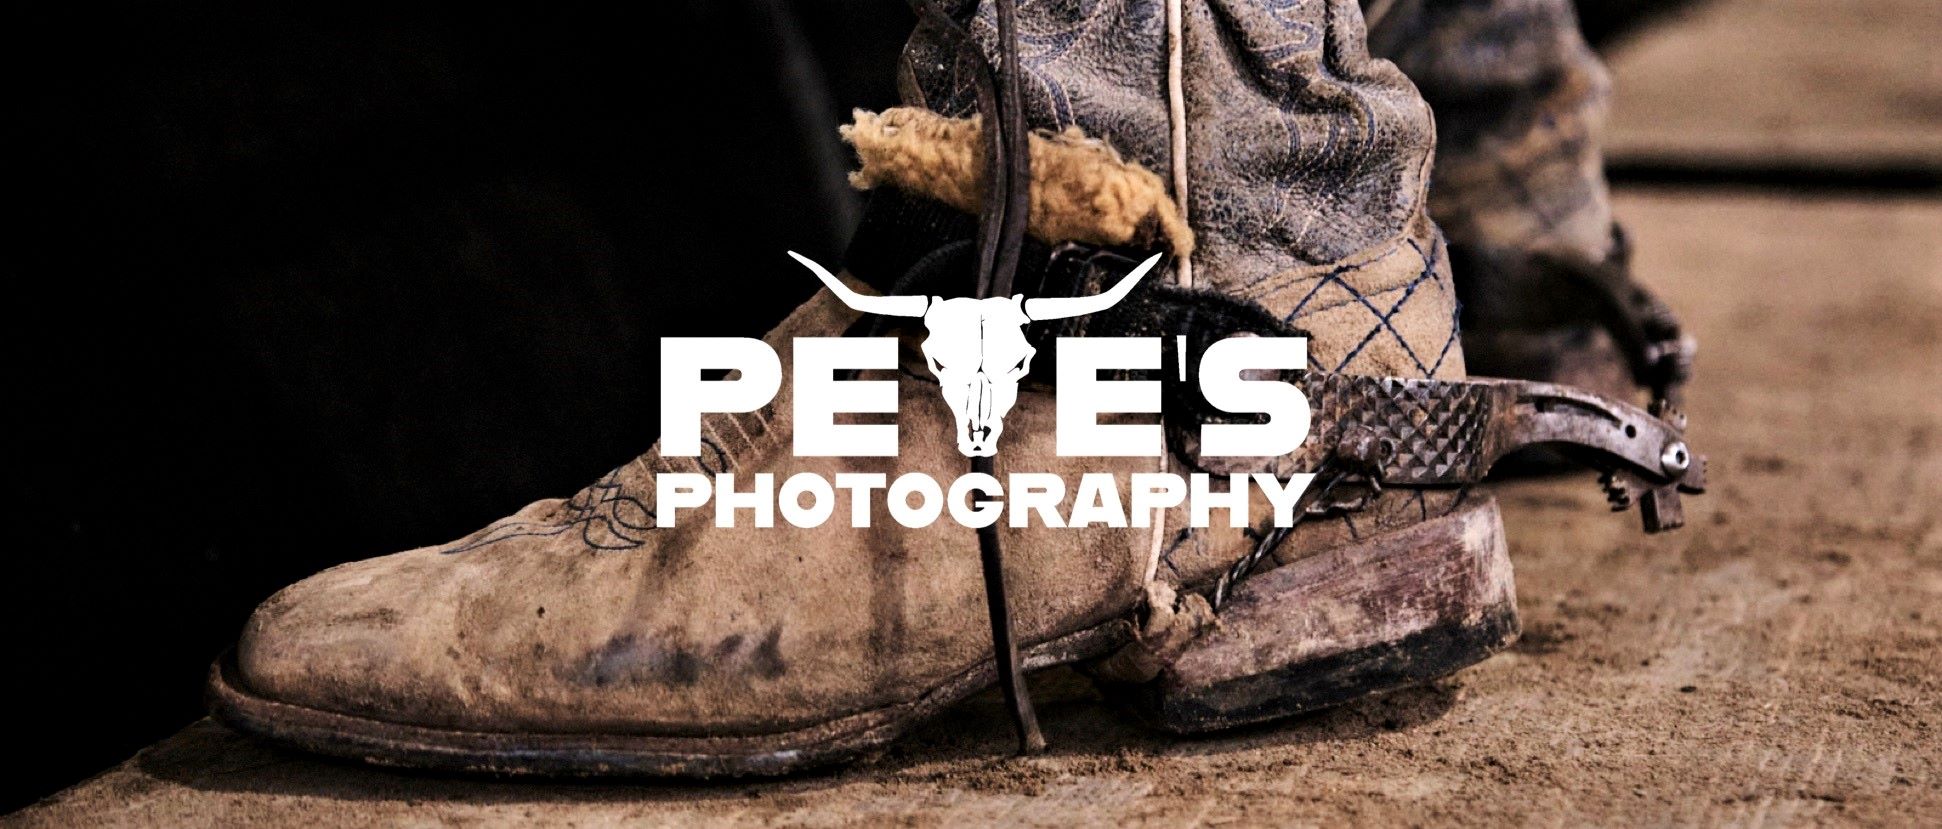 Pete's Photography - Country Music Photographer